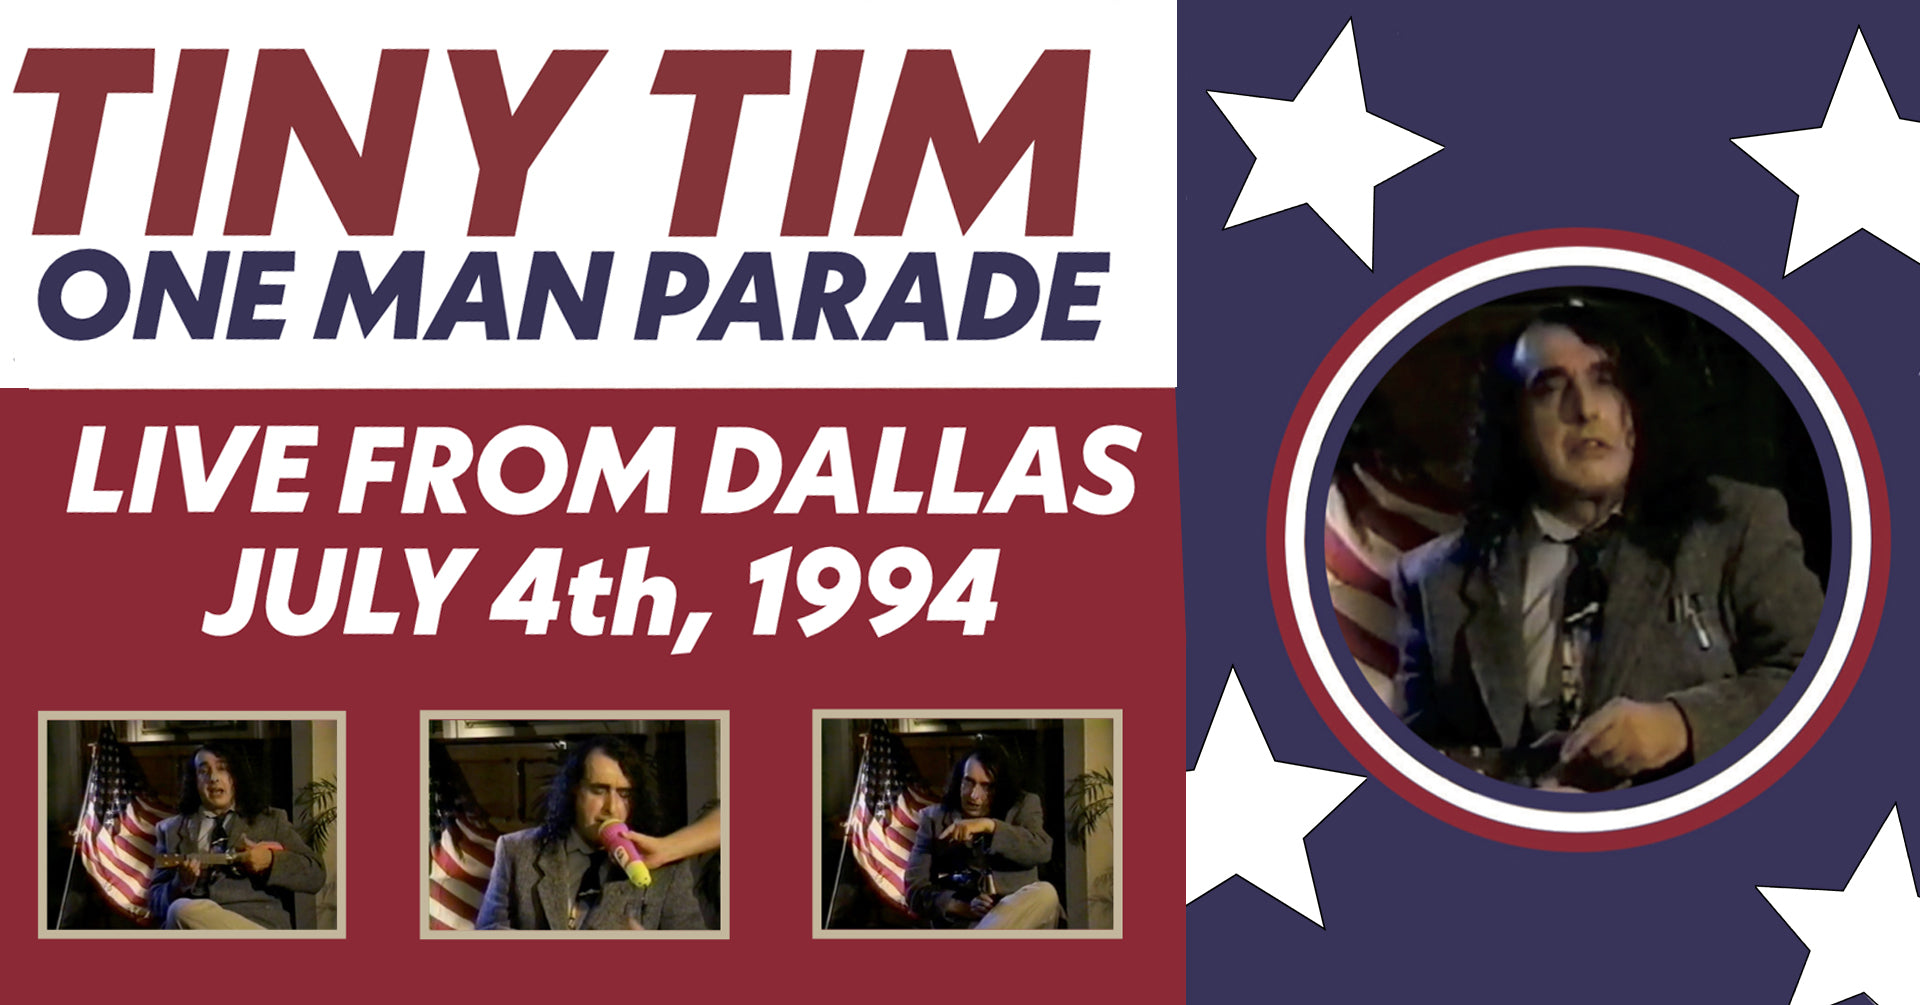 "Lost" Tiny Tim July 4th Concert Film "One Man Parade" Released on DVD!